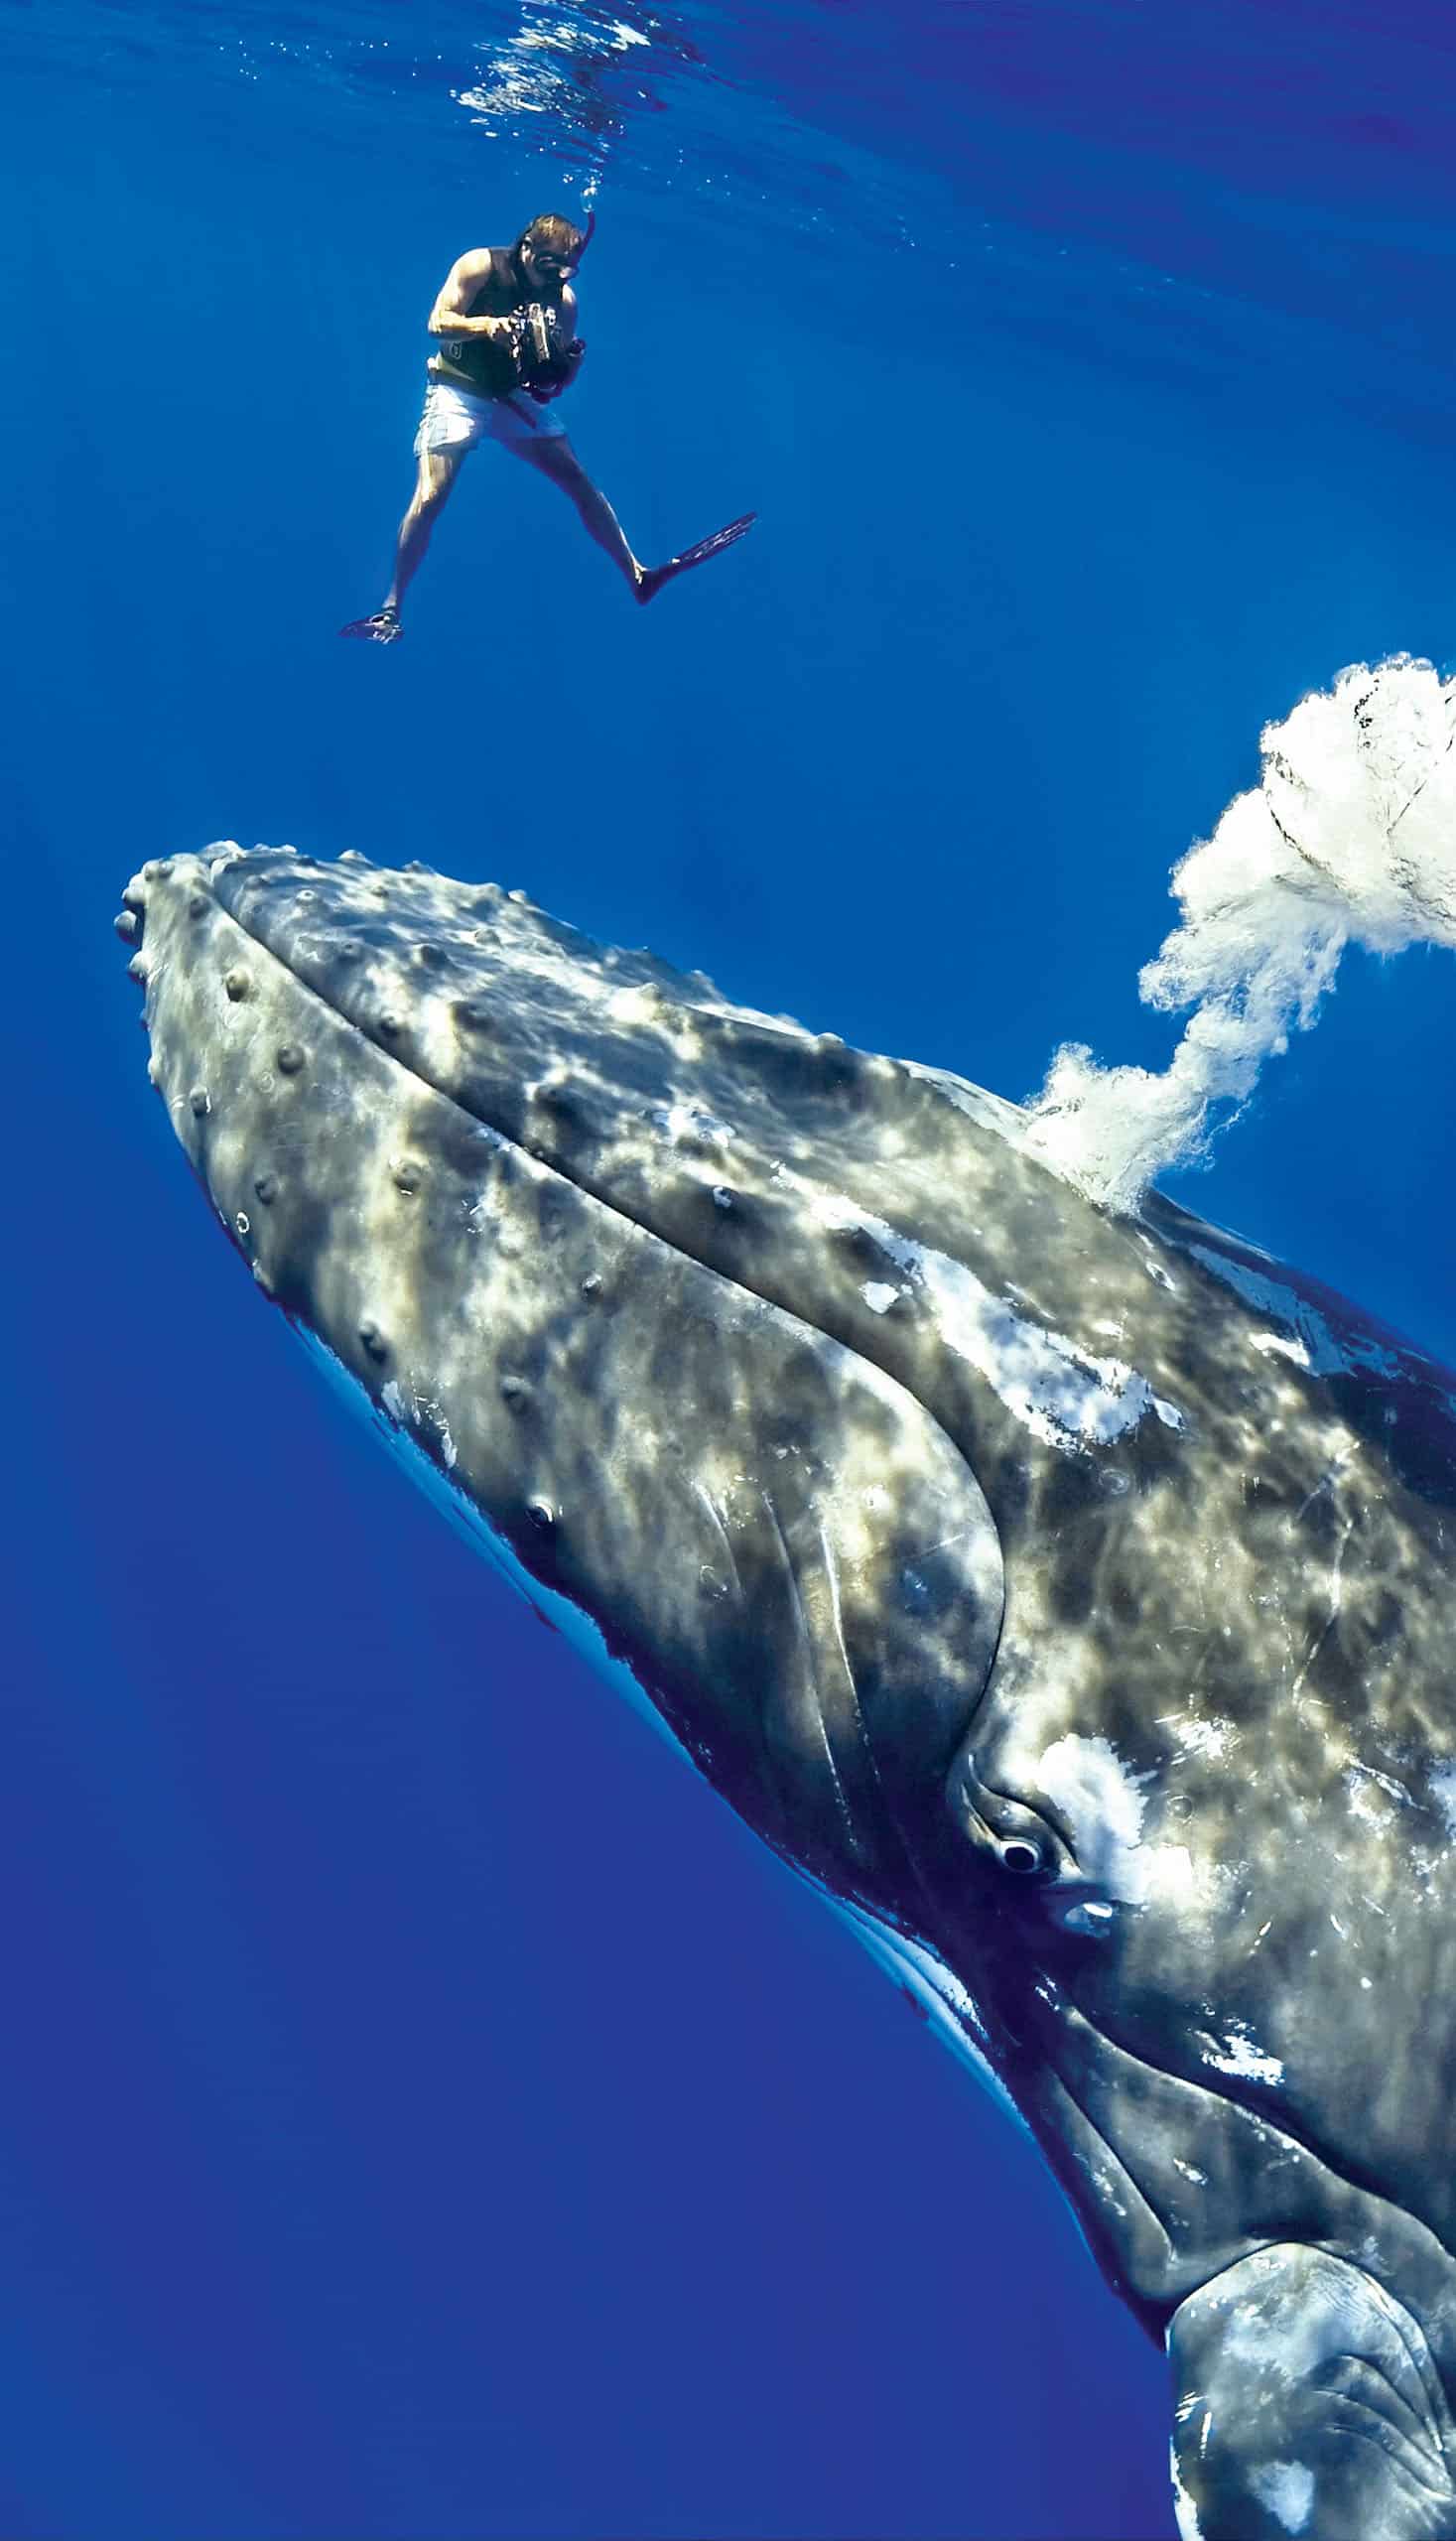 A diver taking a video of a humpback whale underwater.